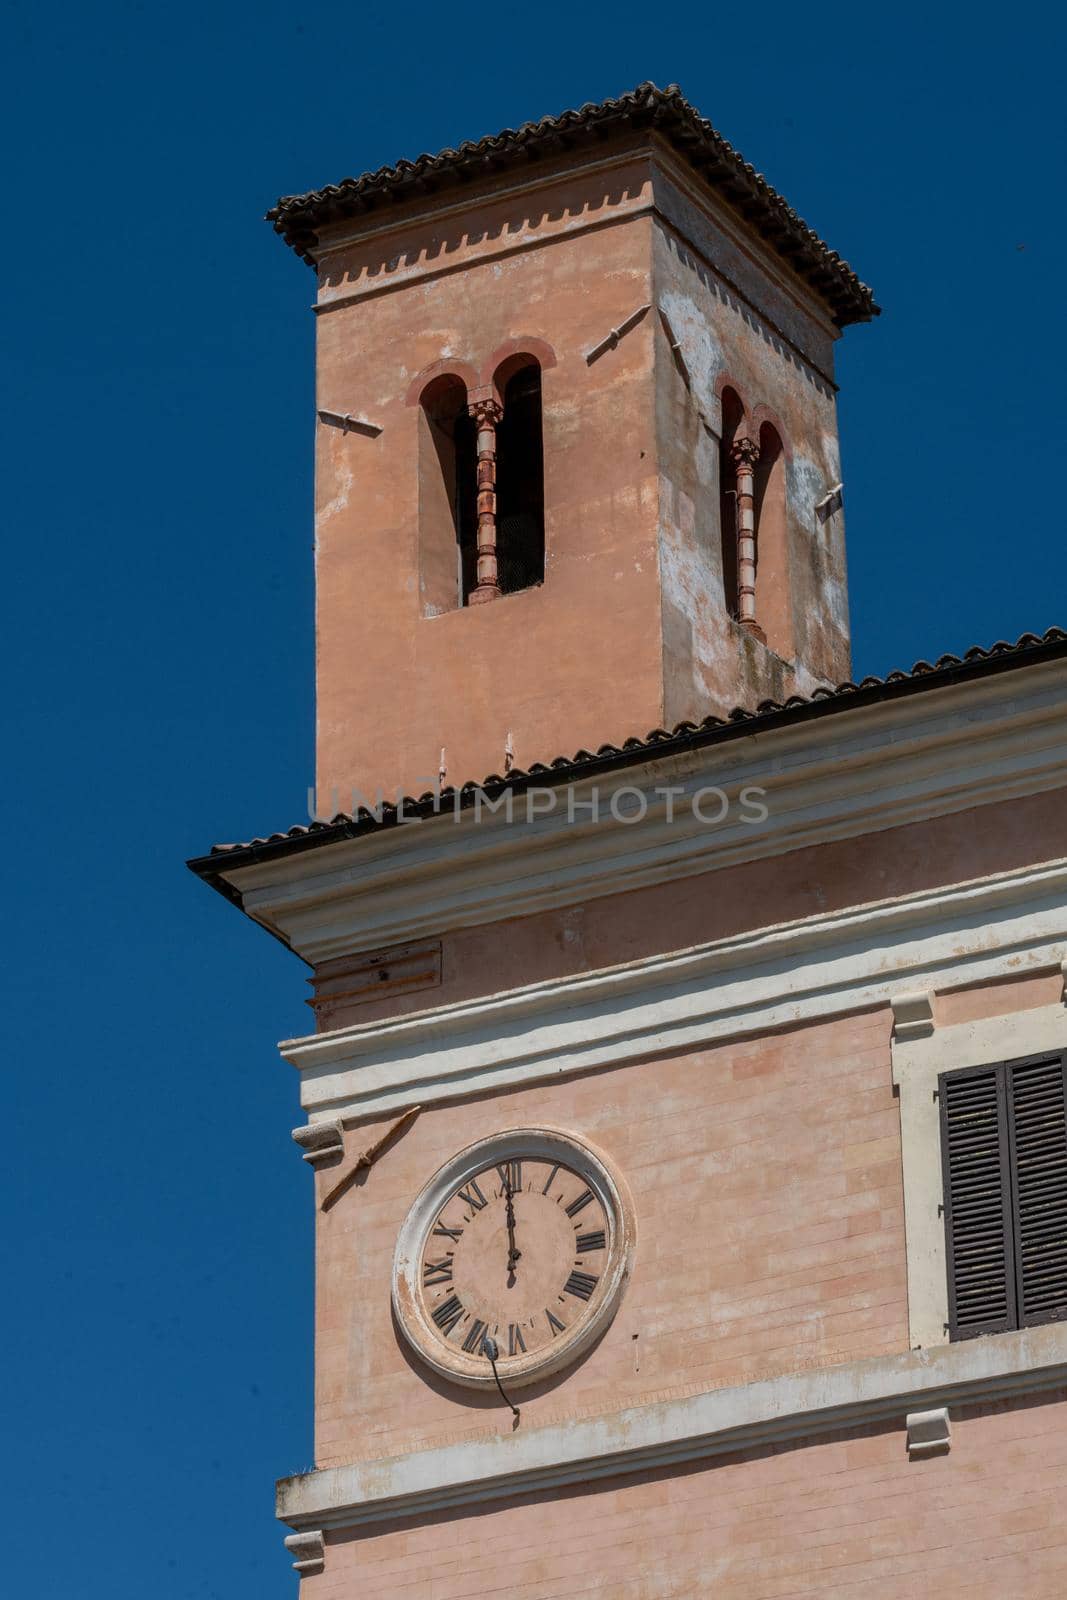 spello detail of the tower of the town hall by carfedeph